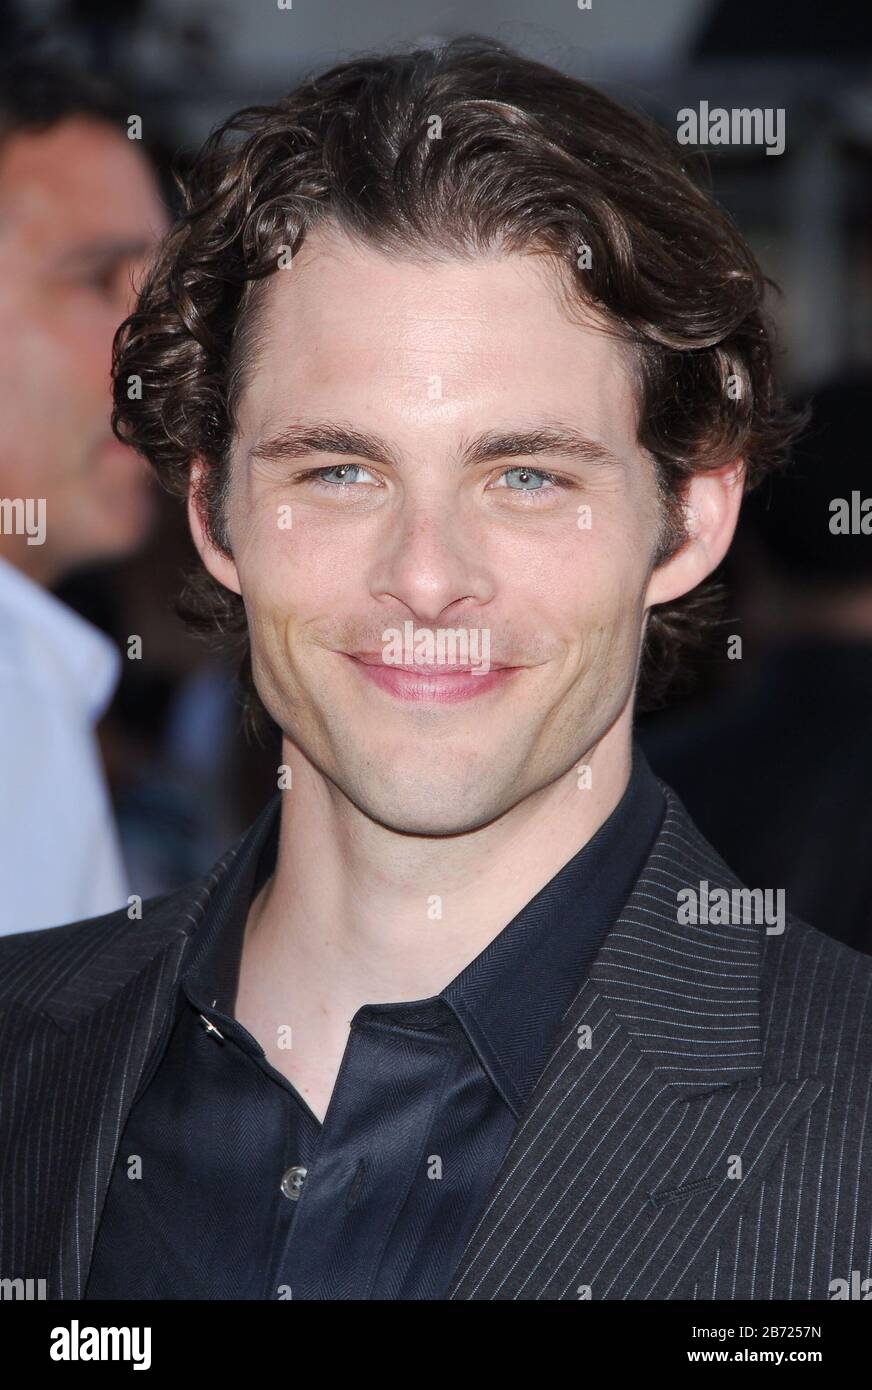 James Marsden at the World Premiere of 'Superman Returns' held at the Mann Village Theater in Westwood, CA. The event took place on Wednesday, June 21, 2006. Photo by: SBM / PictureLux - All Rights Reserved - File Reference # 33984-3745SBMPLX Stock Photo